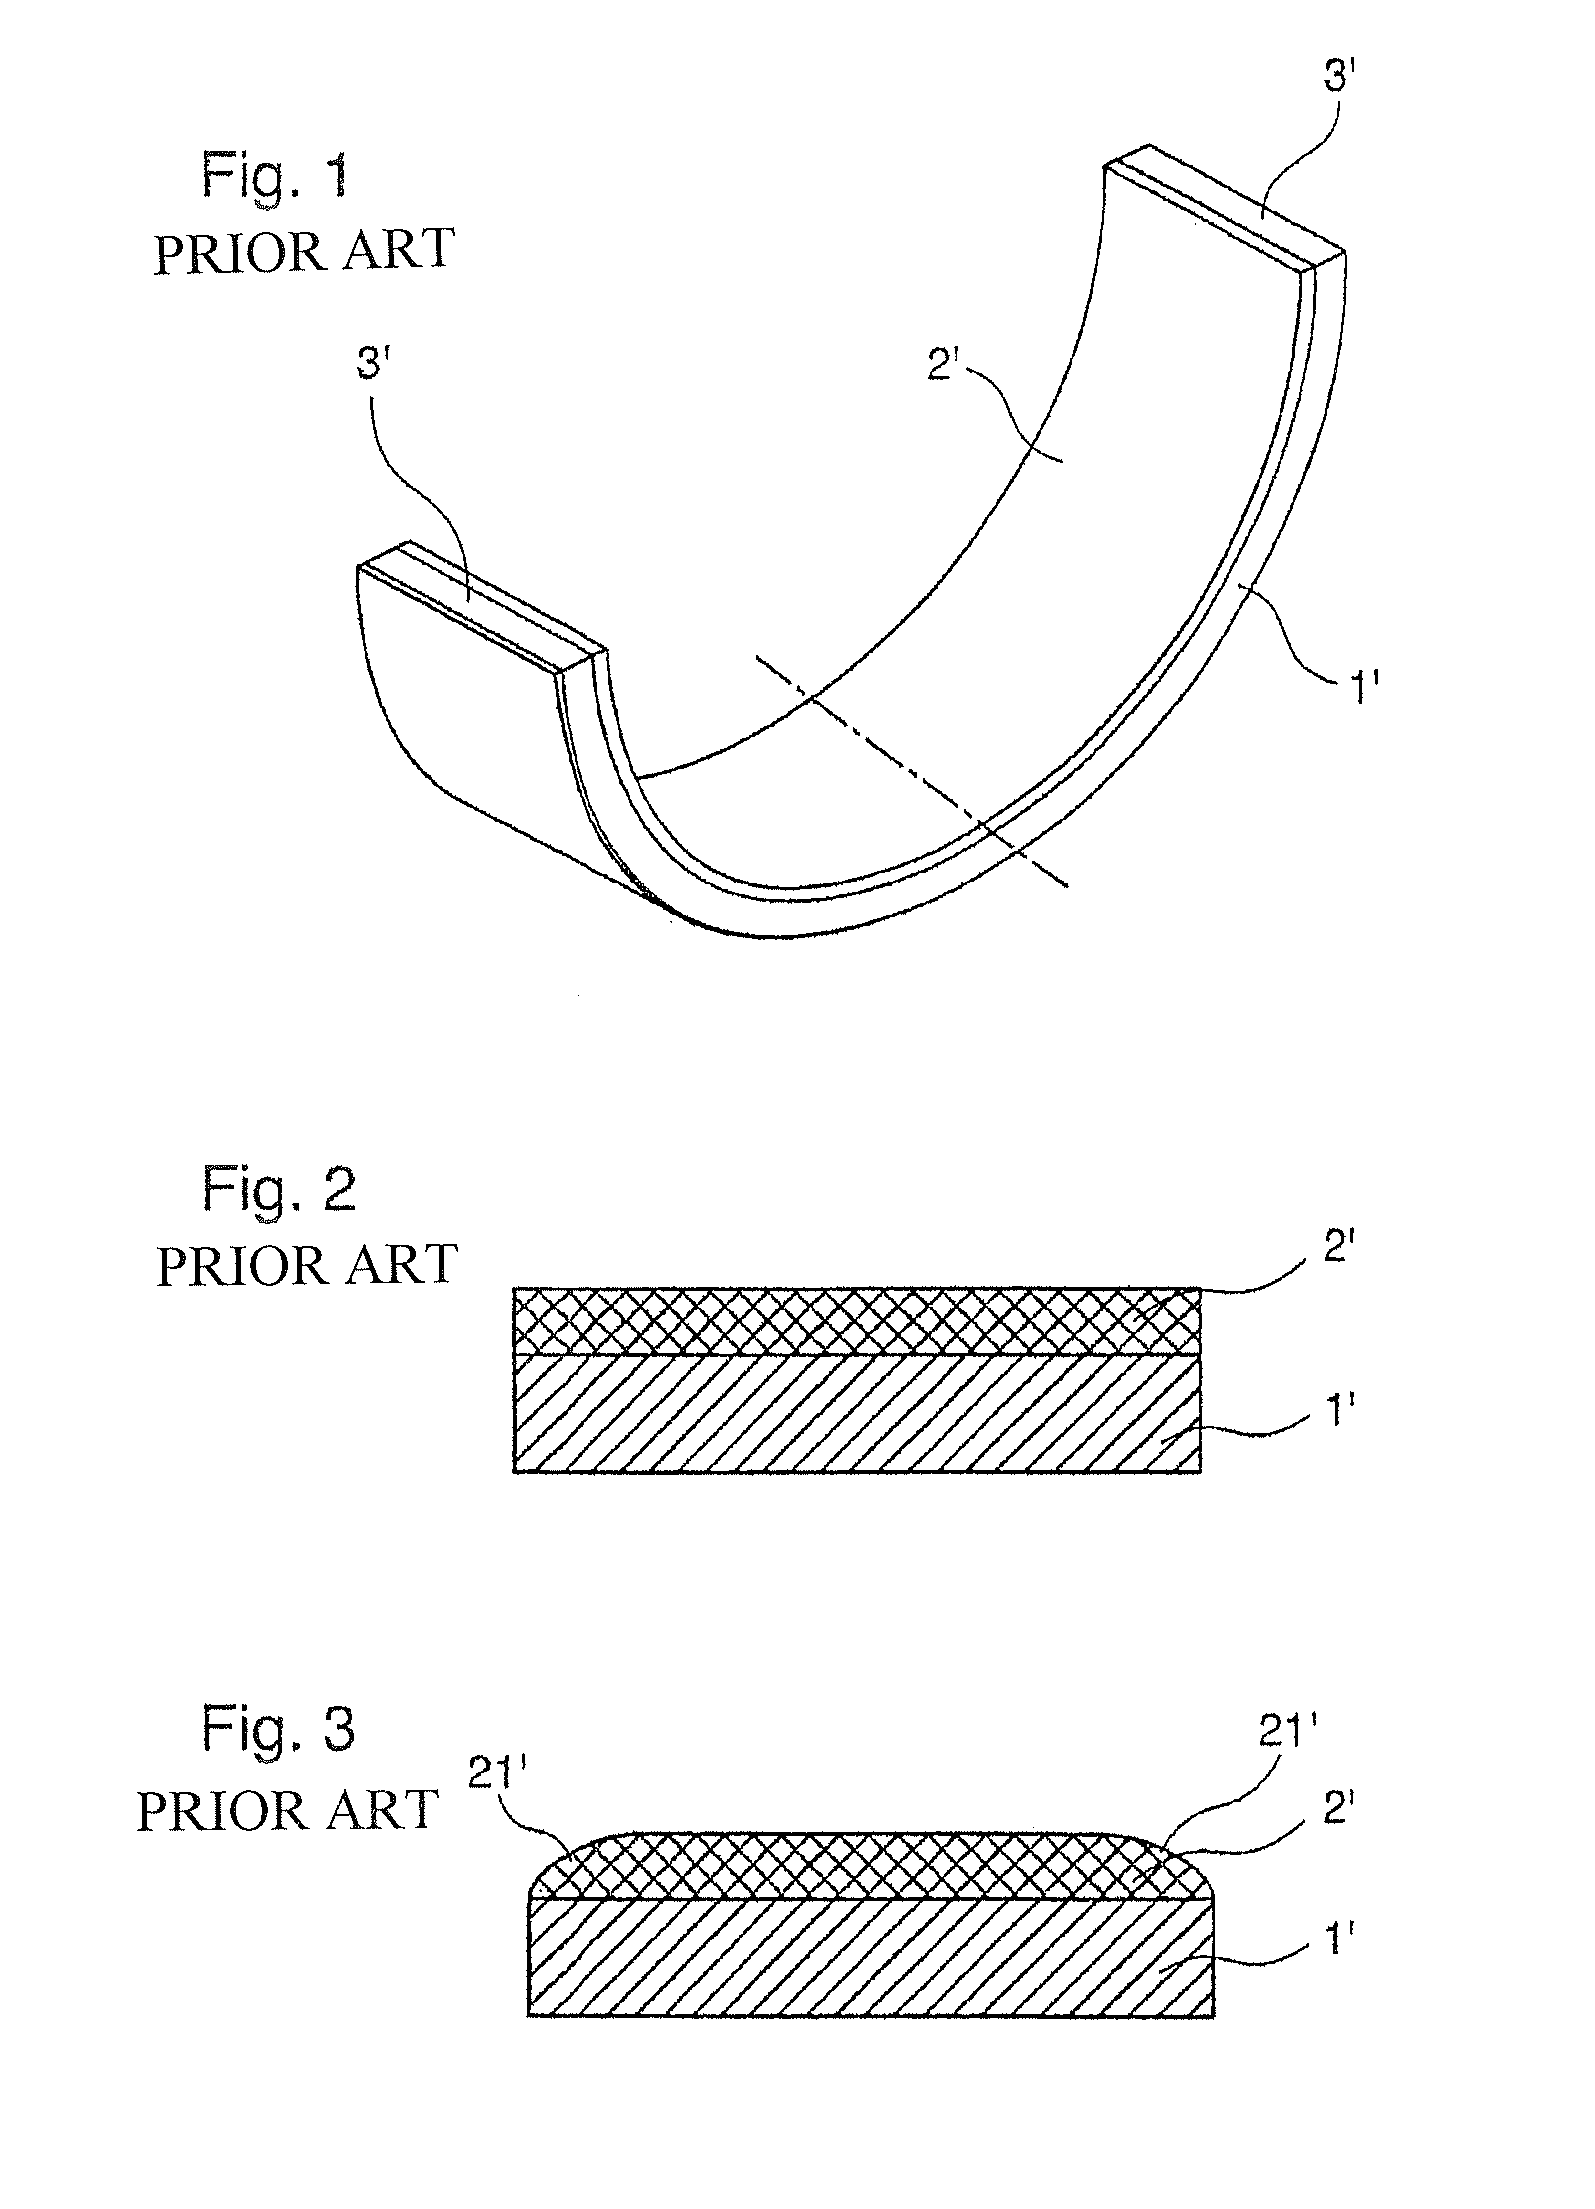 Plain bearing shell with slide face surface geometry which is profiled in the axial direction